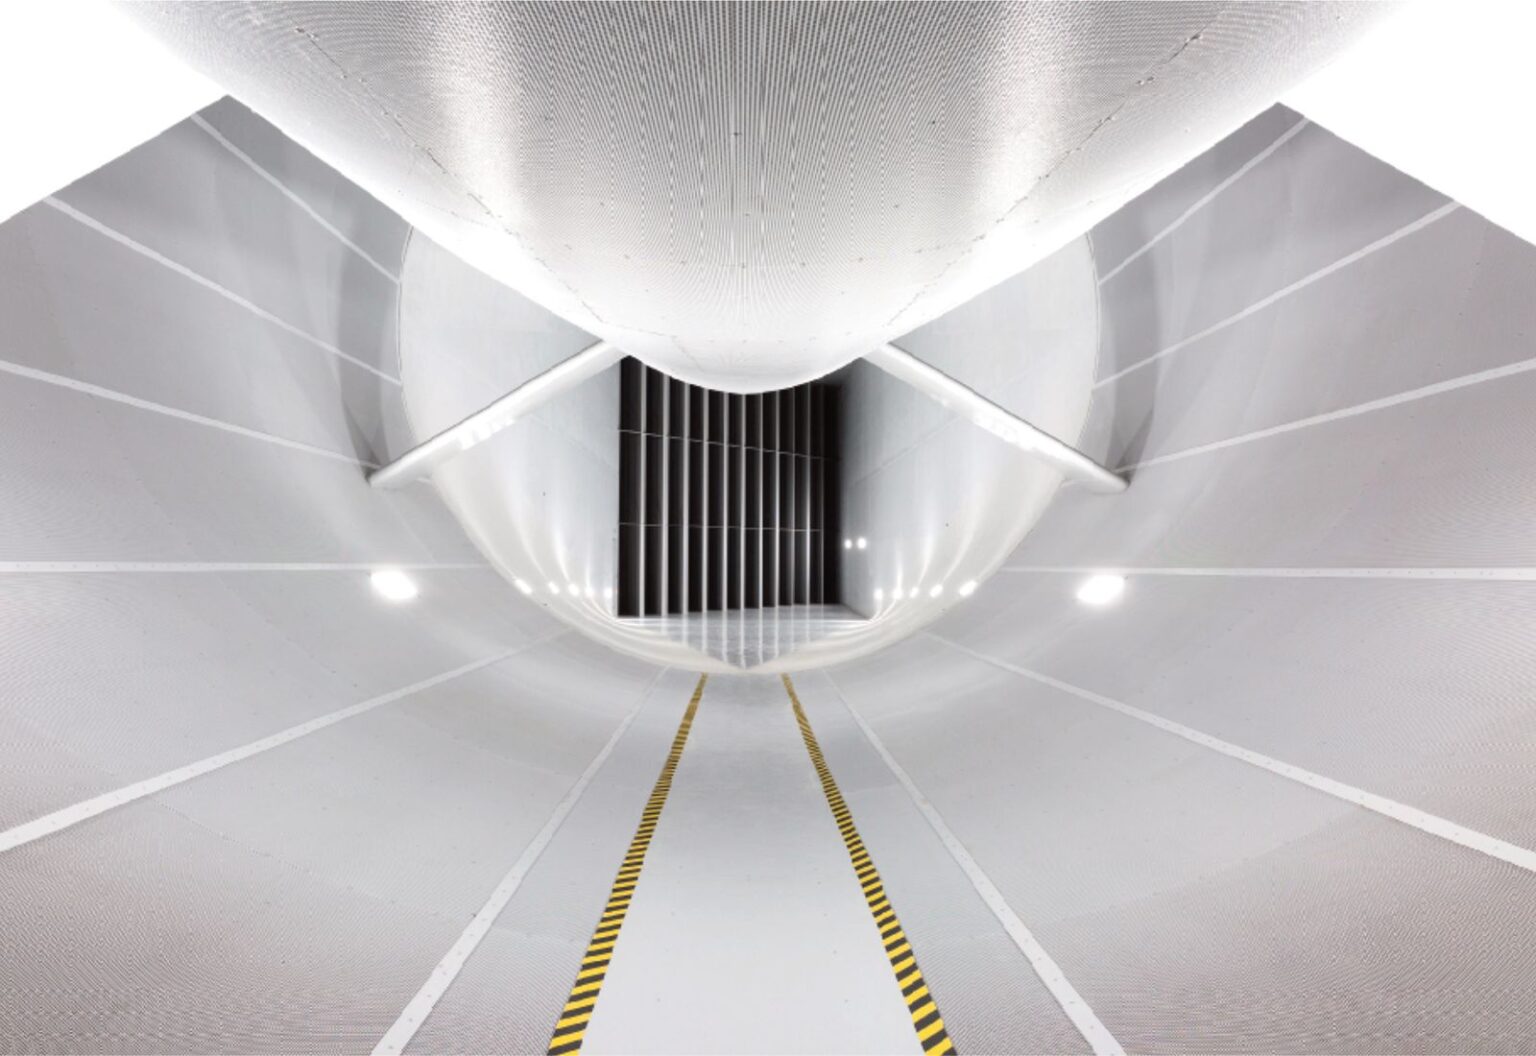 Pursuing Air Flow Perfection: 90 Years of Wind Tunnel Innovation